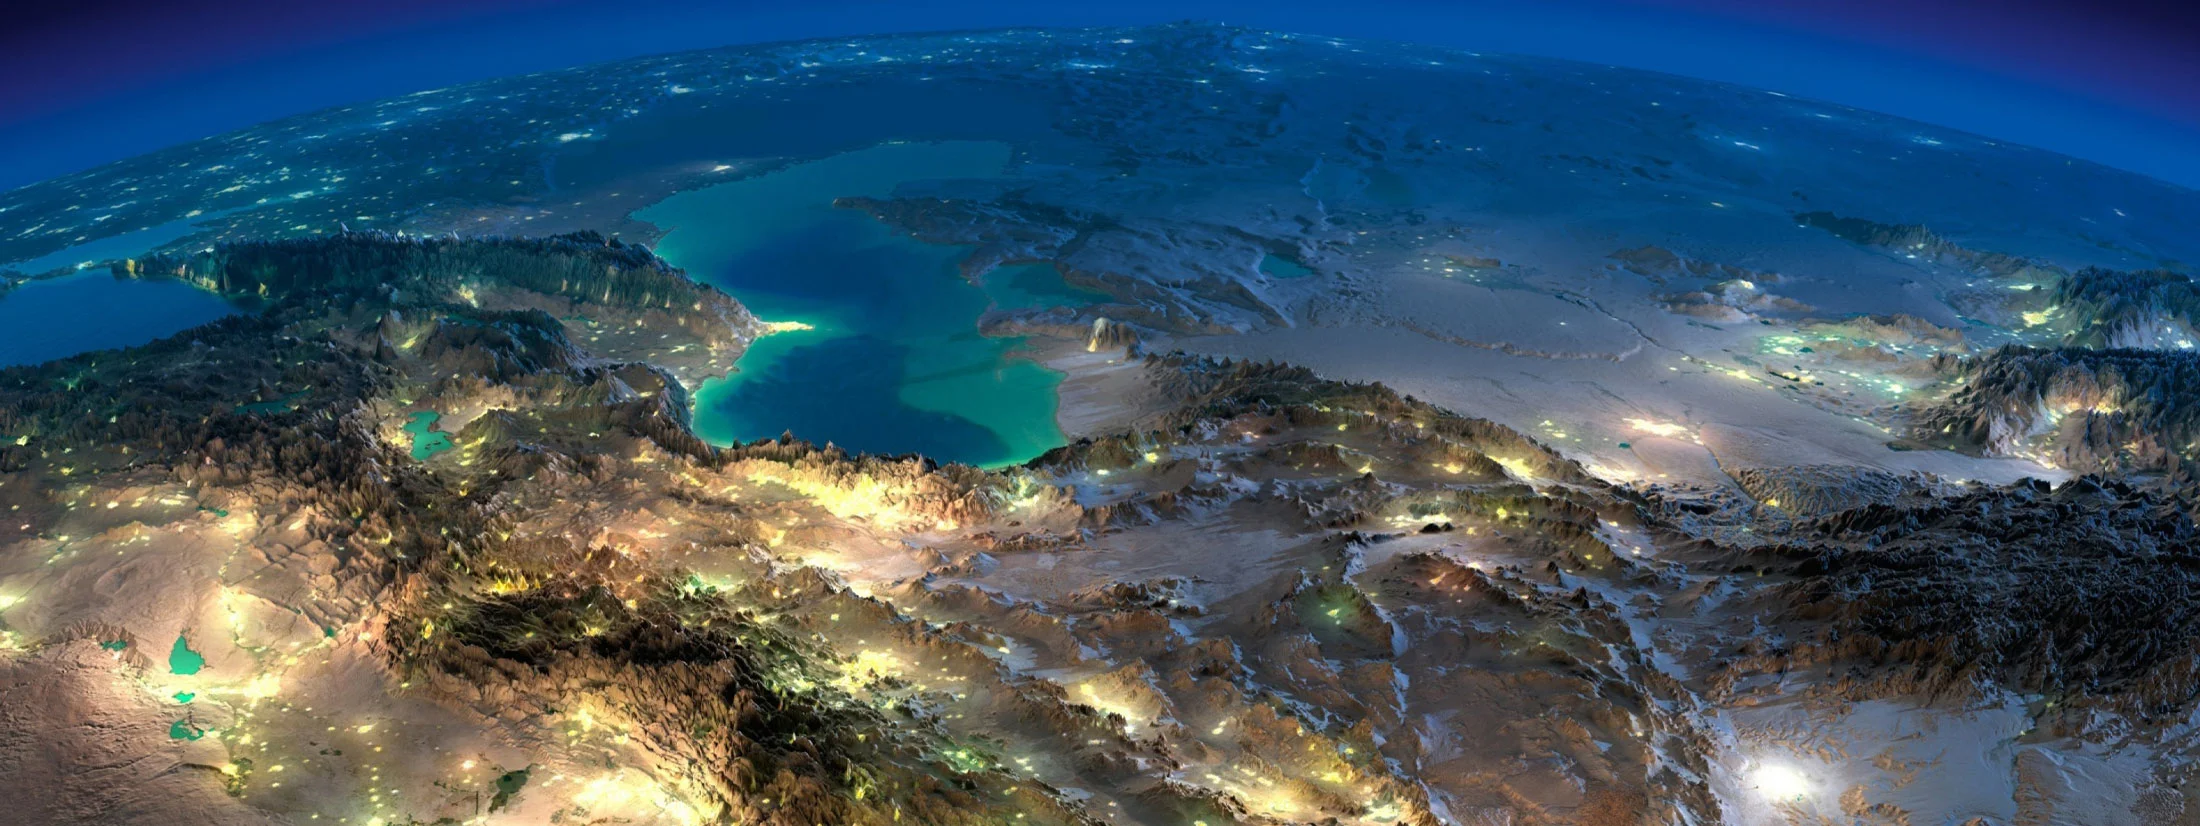 planet-earth-from-above-during-night-with-cities-emitting-light